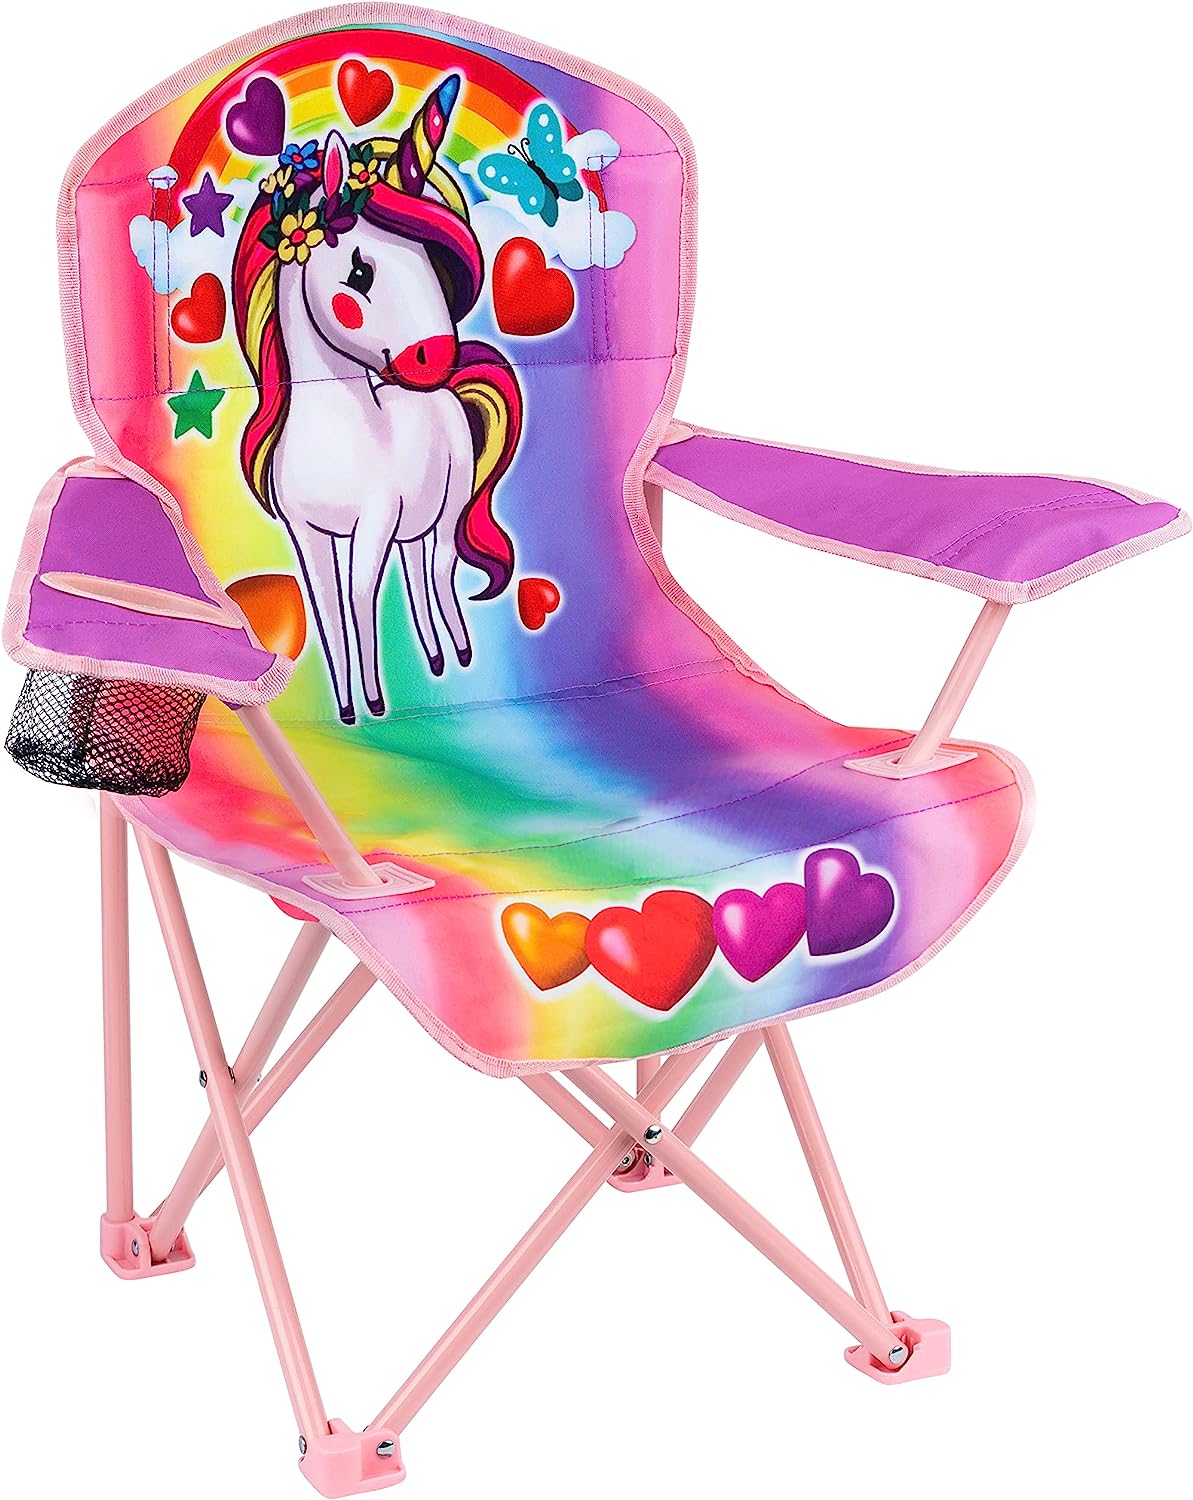 Toy To Enjoy Outdoor Unicorn Chair for Kids Foldable Children's Chair